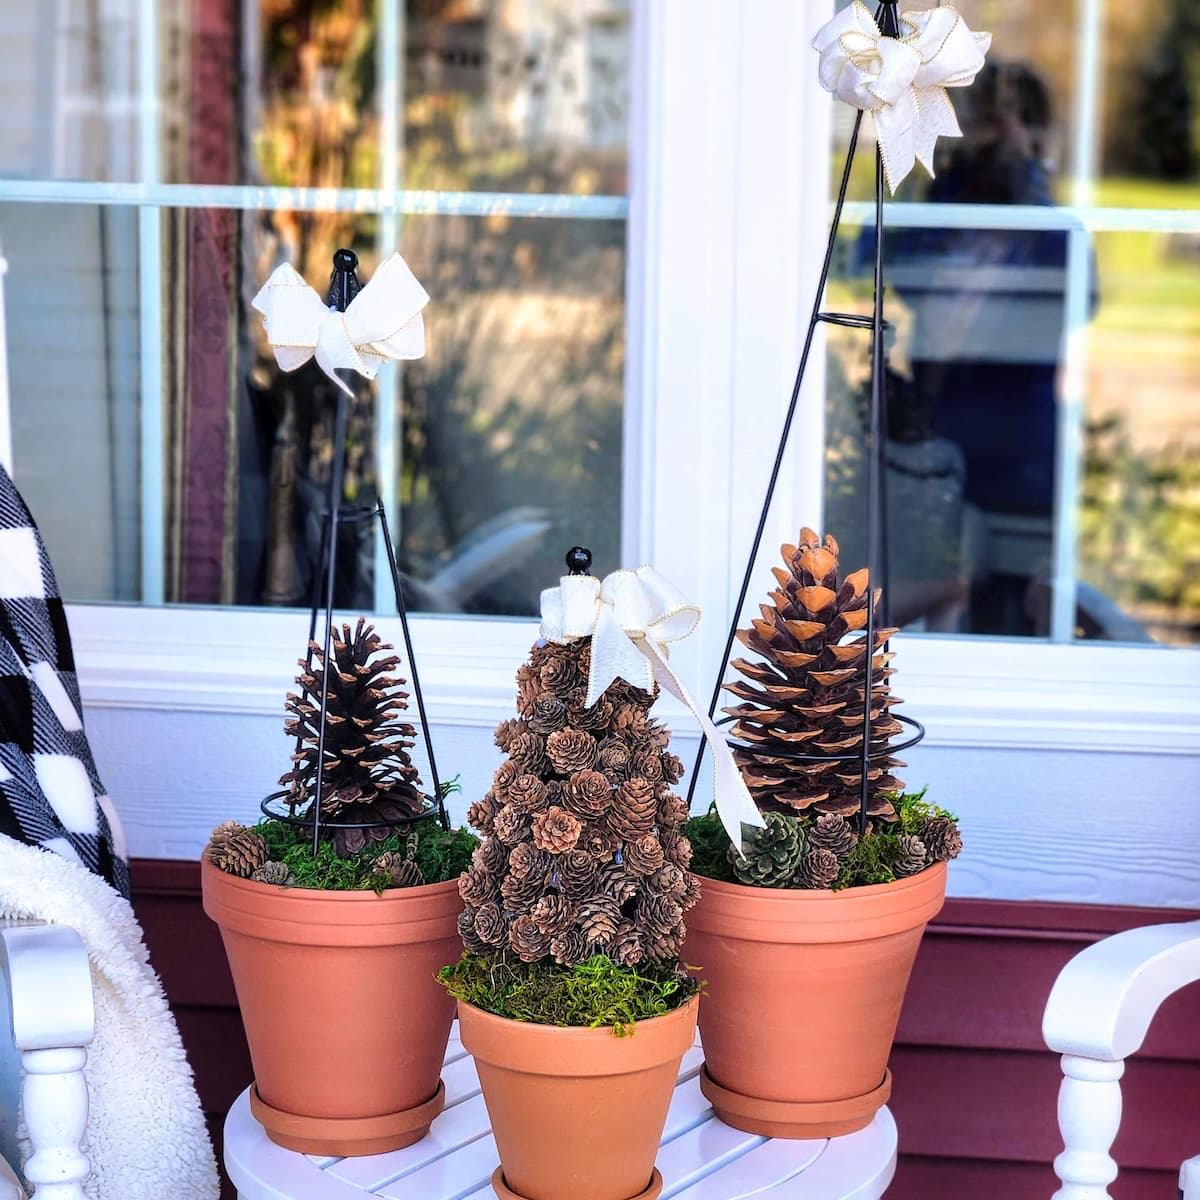 Large Fresh Pine Cones for crafts or decorations